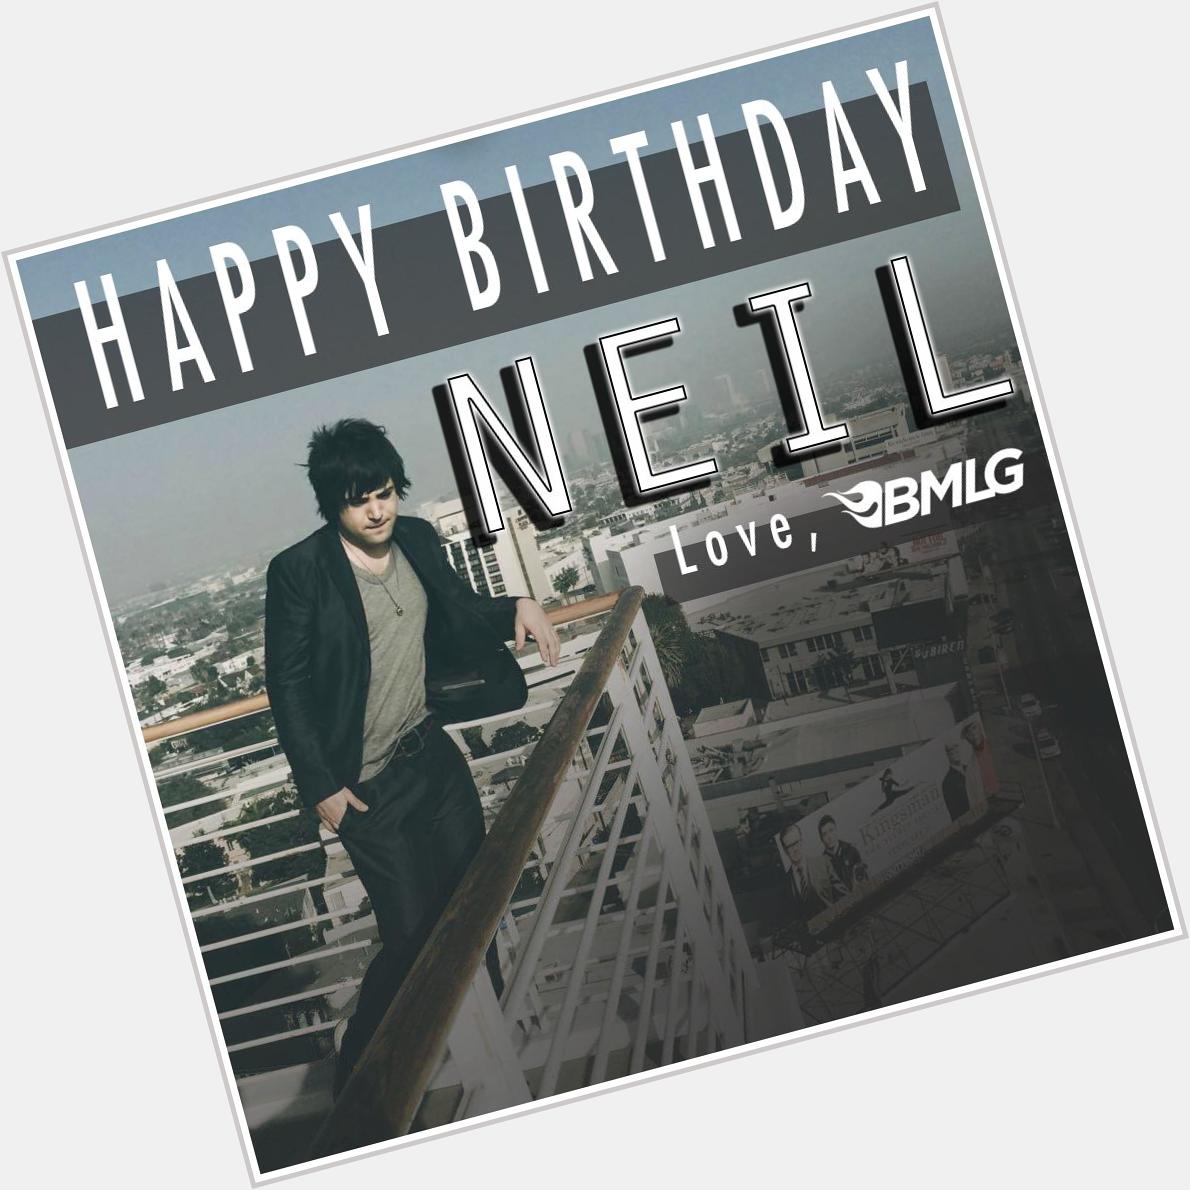 Happy Birthday to Neil Perry! We hope you have an amazing day! to wish him a Happy Birthday! 